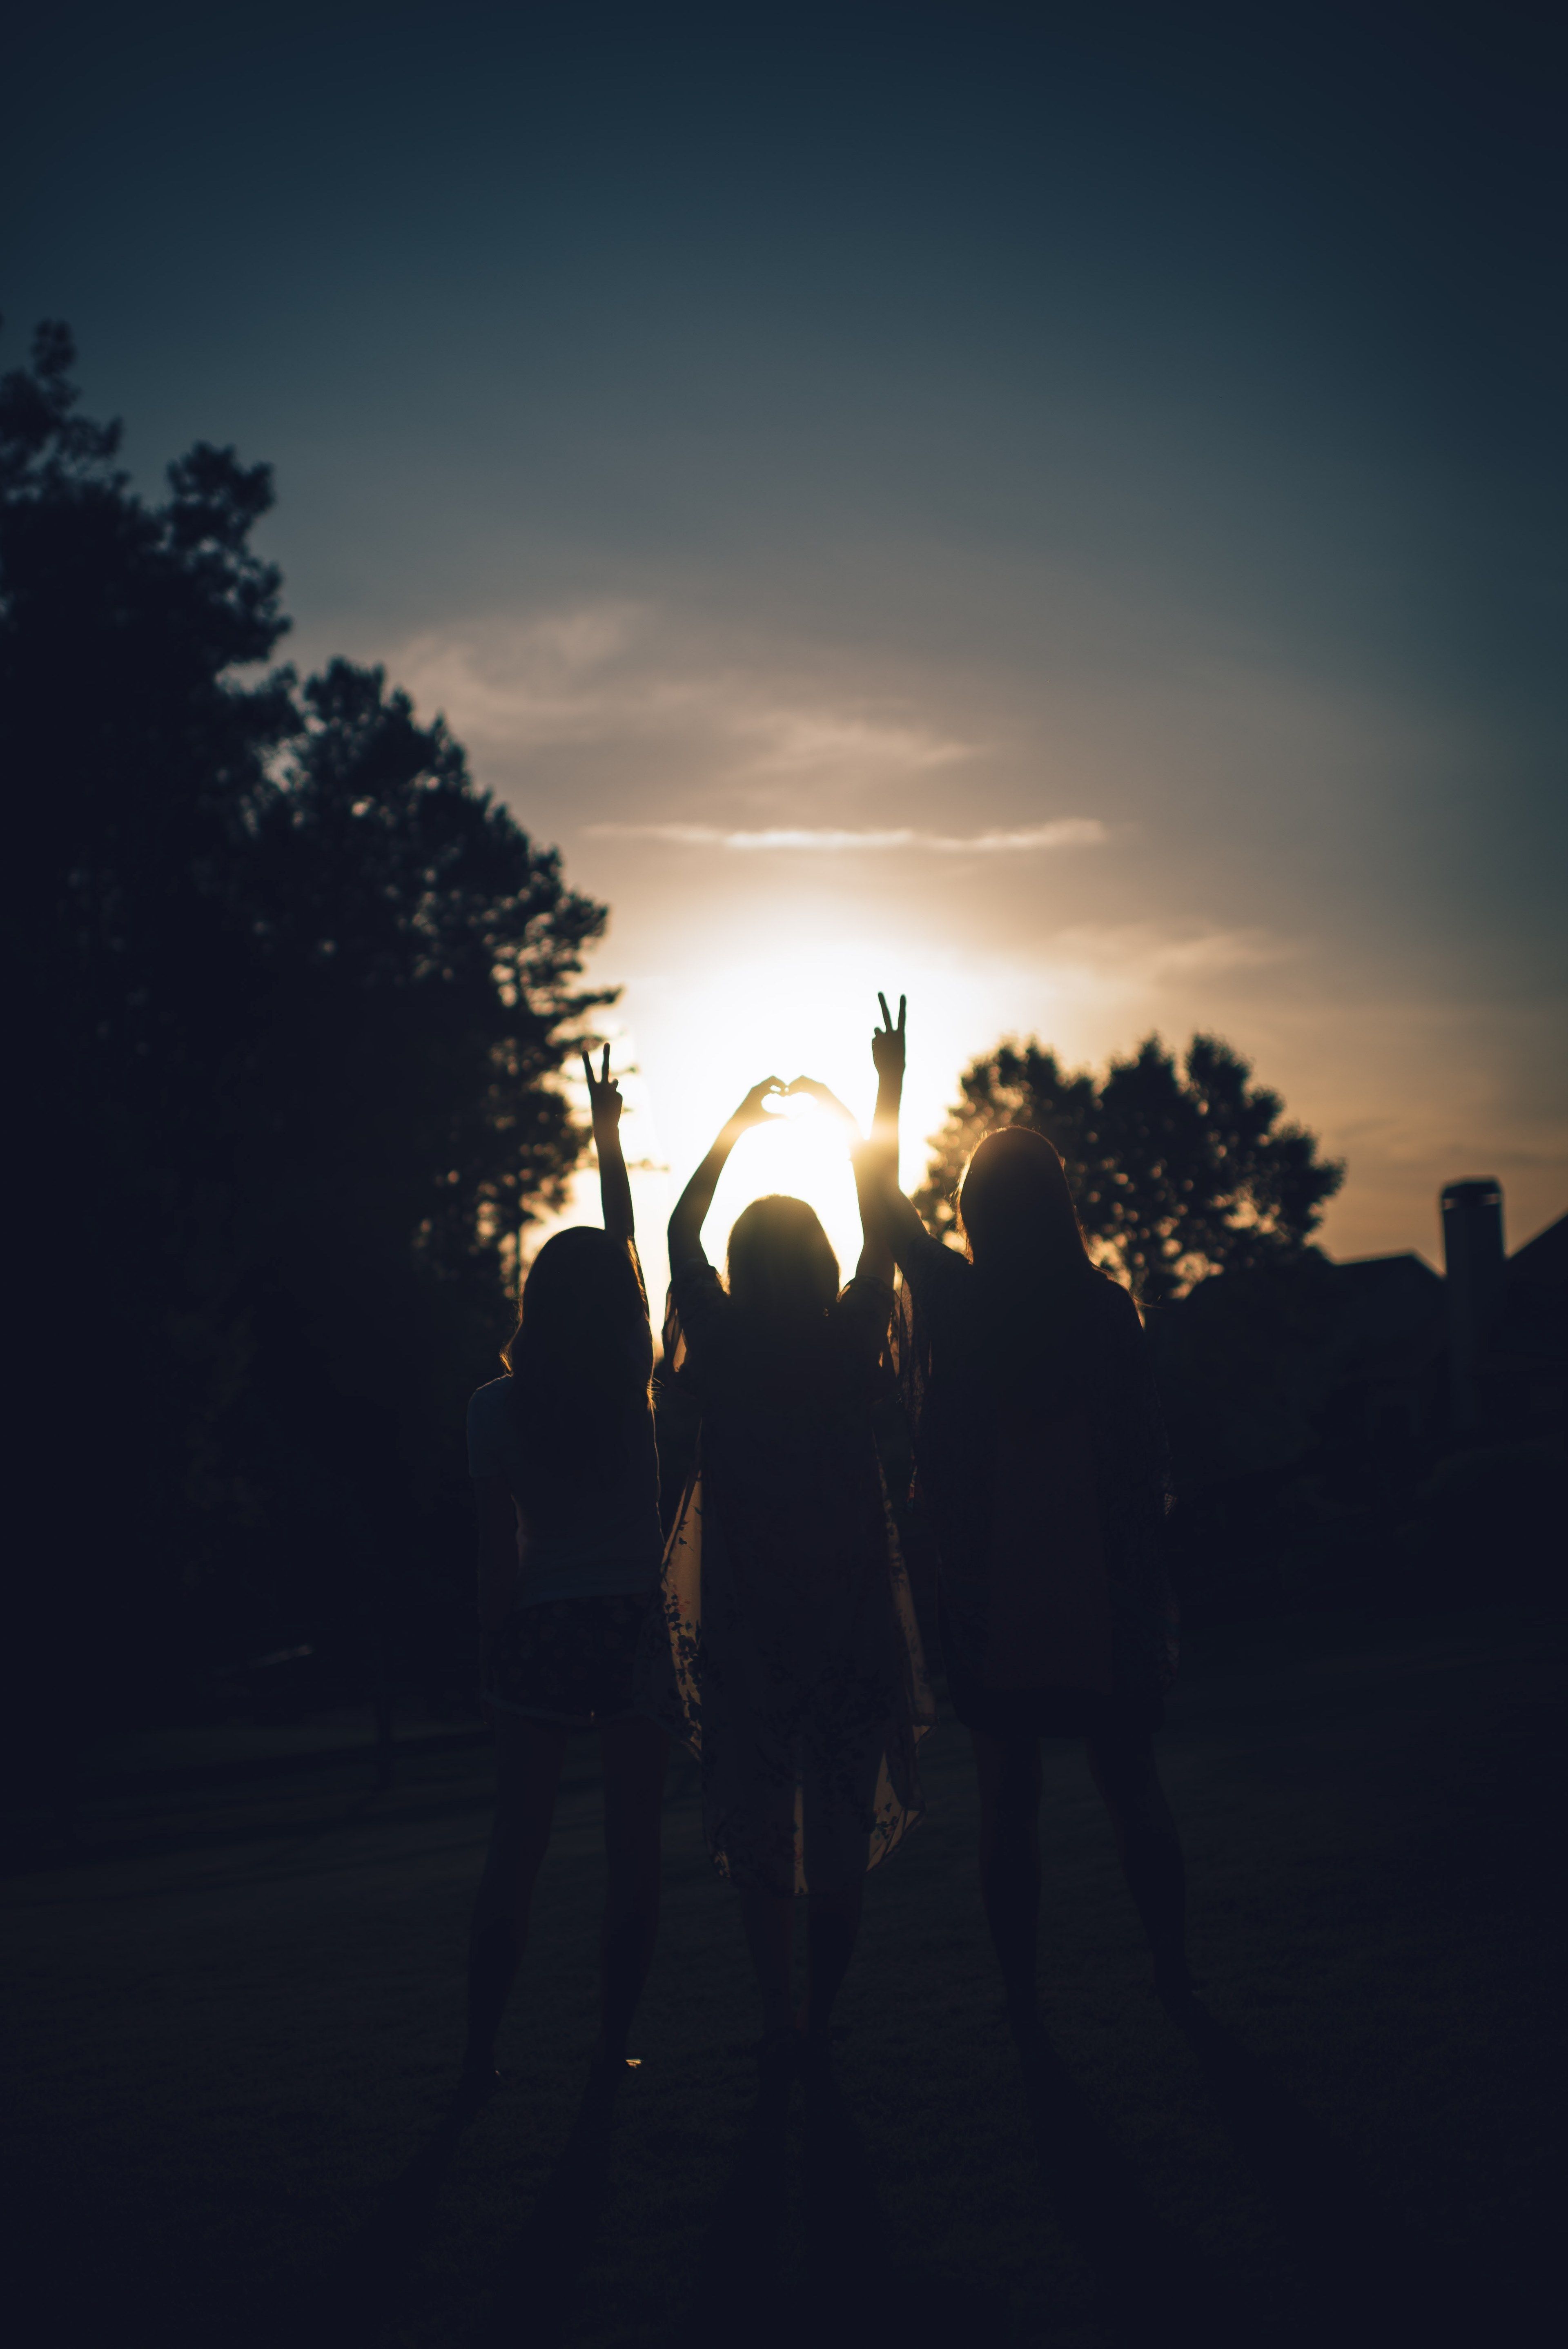 Wallpaper / silhouette of three girls holding up peace signs and a heart hand sign during sunset, love and peace in the sunset 4k wallpaper